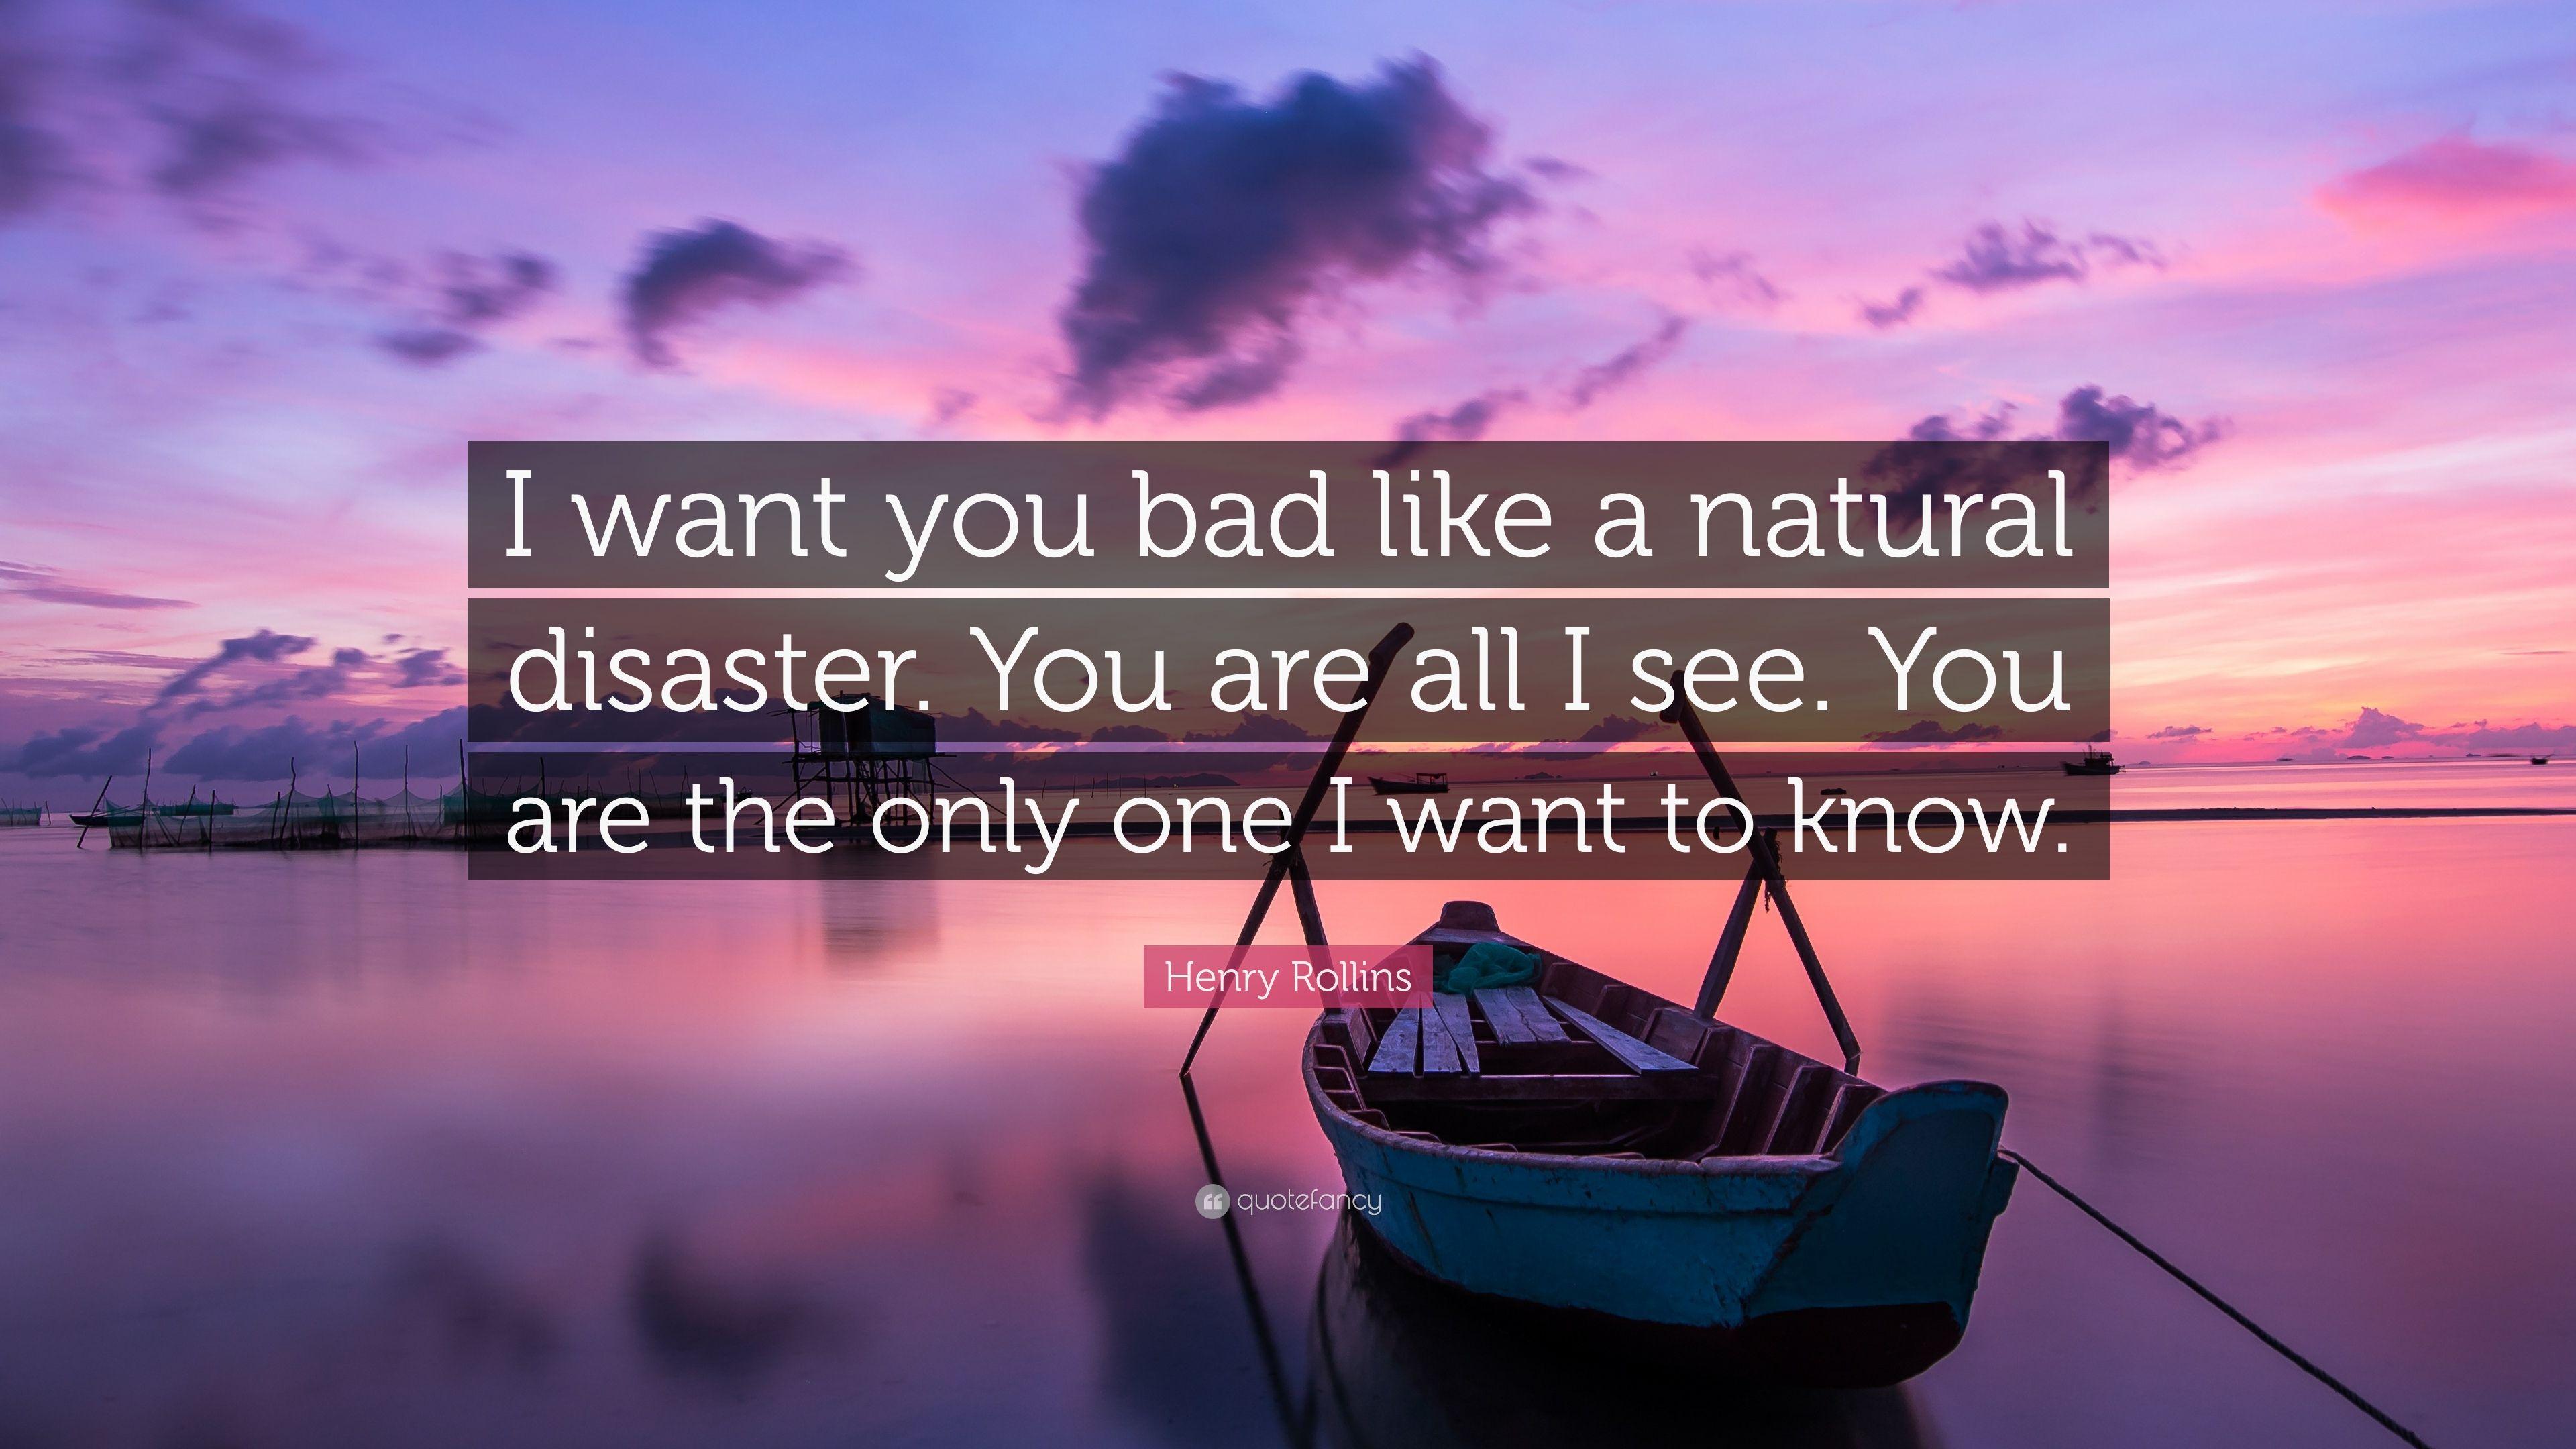 Henry Rollins Quote: “I want you bad like a natural disaster. You